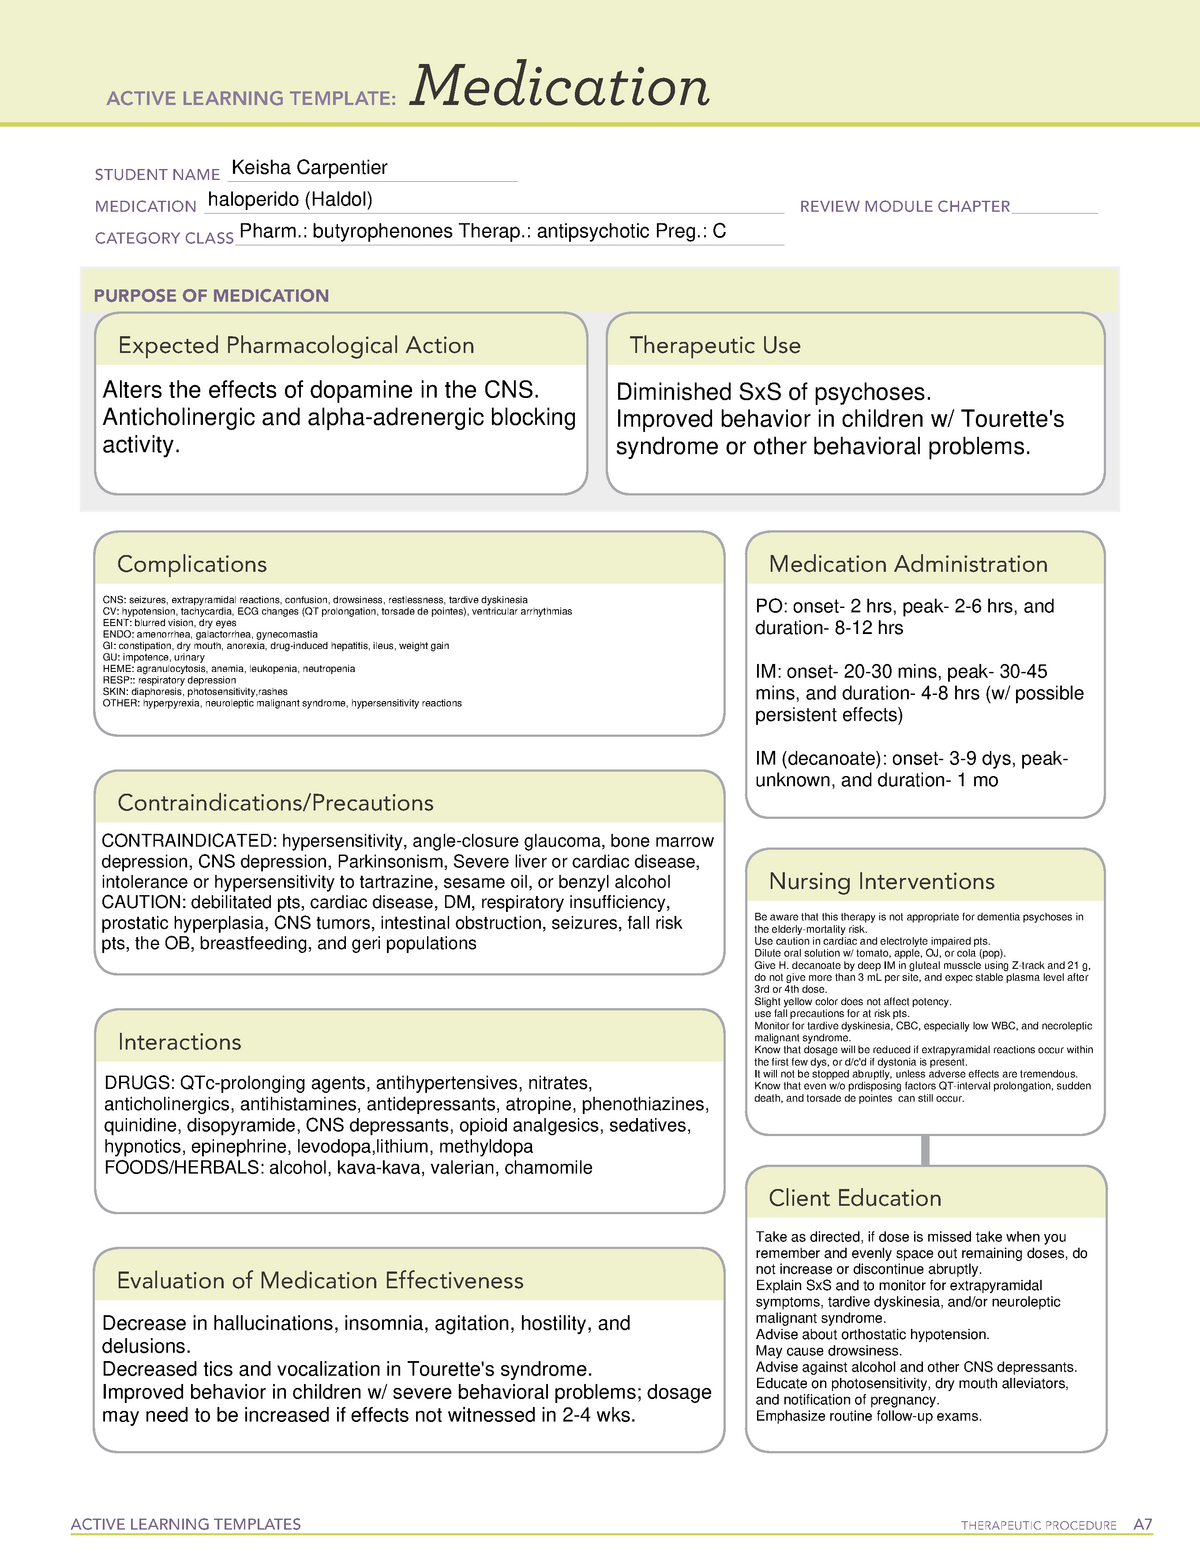 Haloperidol ACTIVE LEARNING TEMPLATES THERAPEUTIC PROCEDURE A